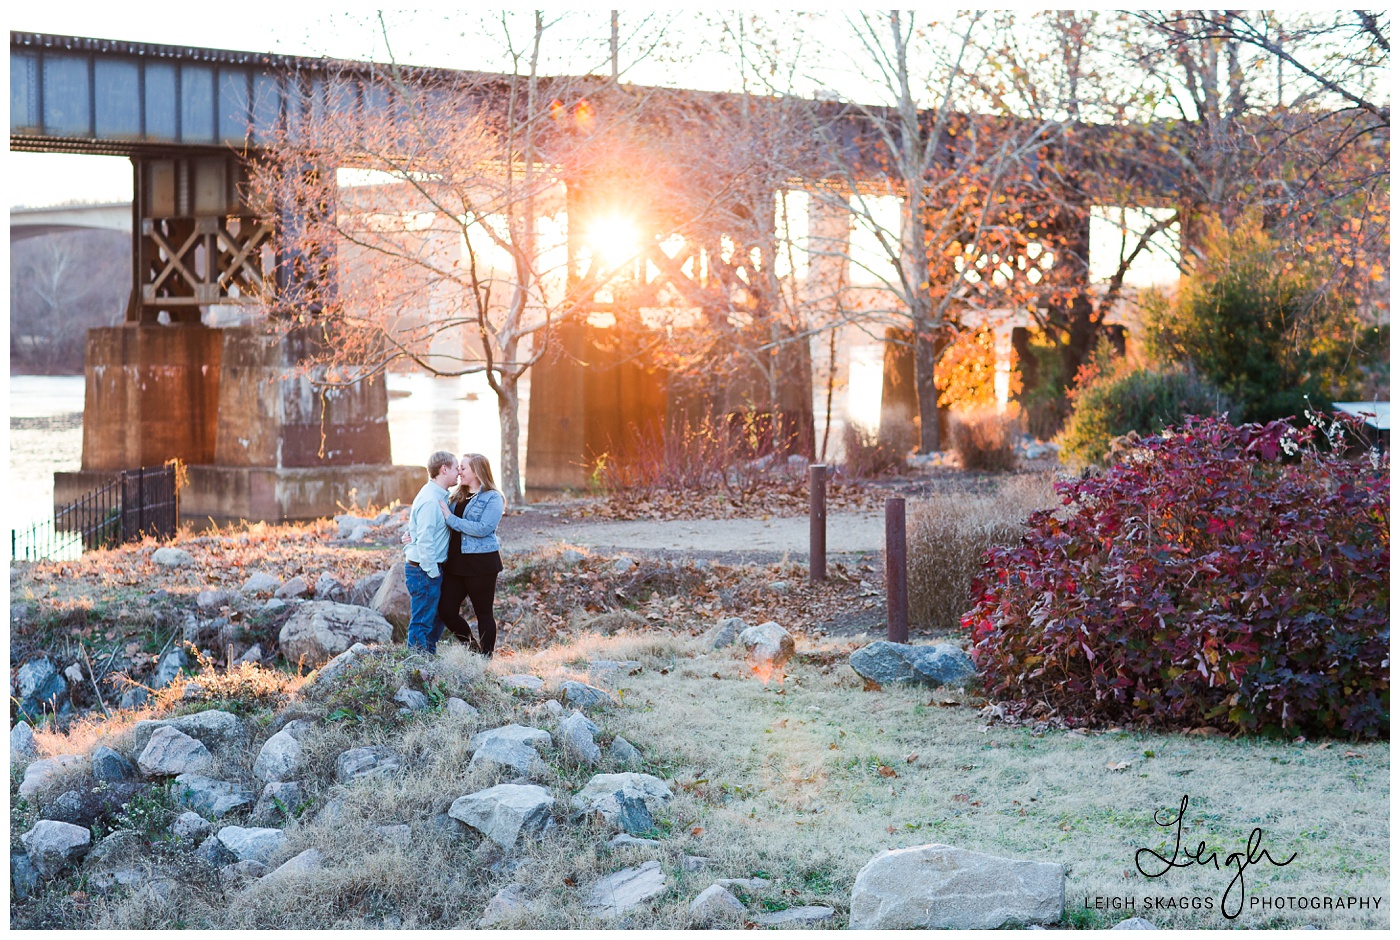 Becca & Thomas | Libby Hill Park and Tredegar Engagement session